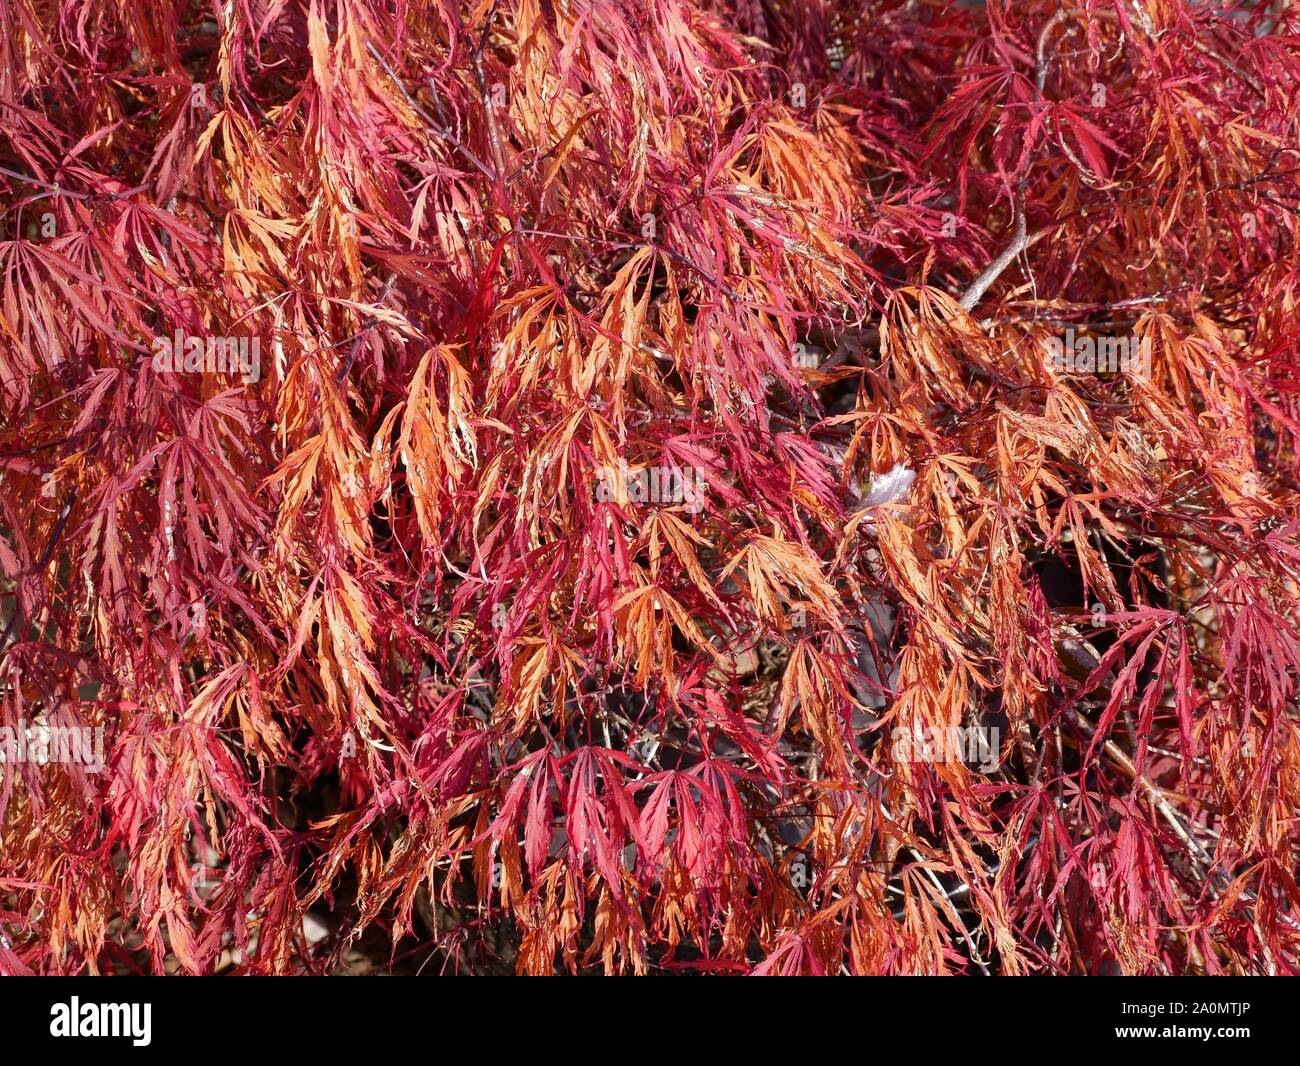 Acer Palmatum Garney Japanese Maple in its autum fall coloures before it looses its leaves for winter in Huddersfield Yorkshire England Stock Photo